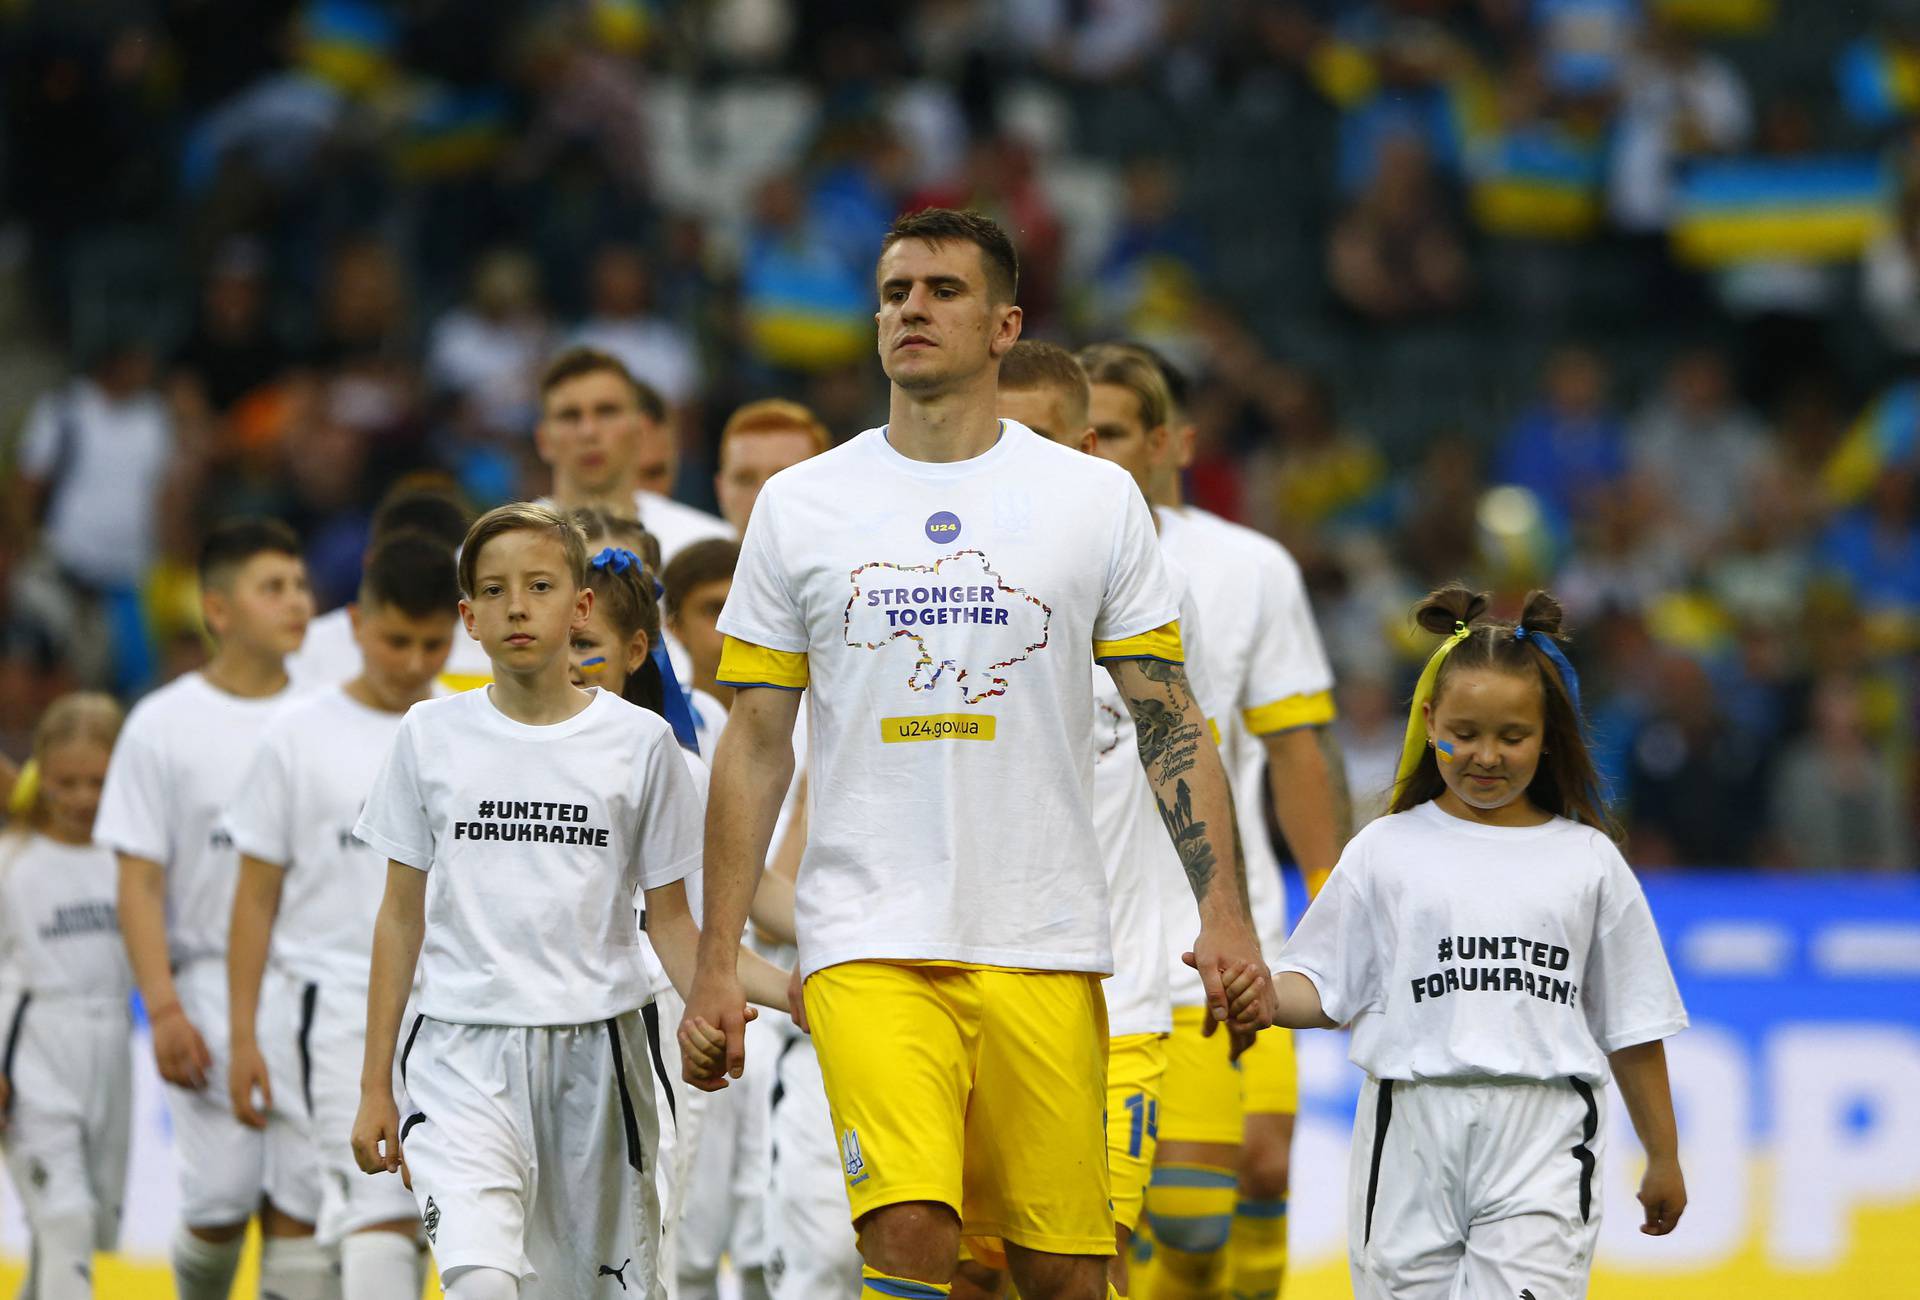 Friendly - A match for peace and the end of war in Ukraine - Borussia Moenchengladbach v Ukraine